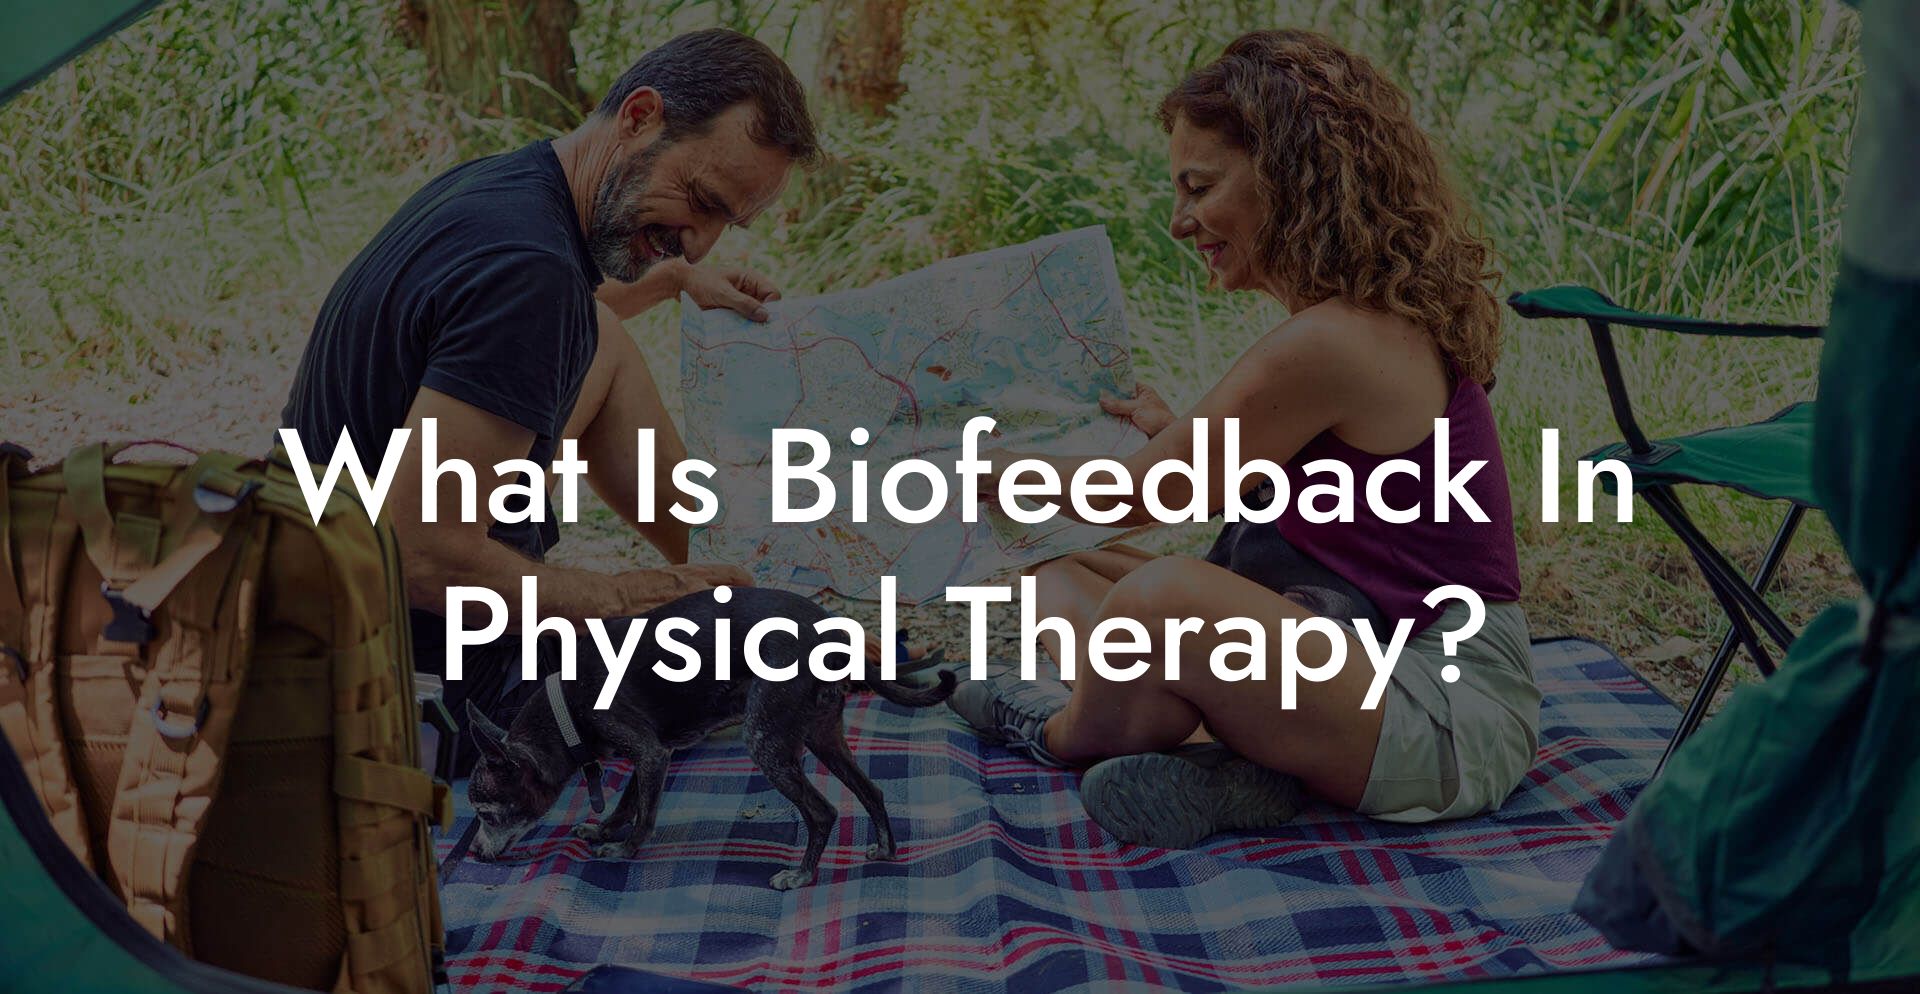 What Is Biofeedback In Physical Therapy?